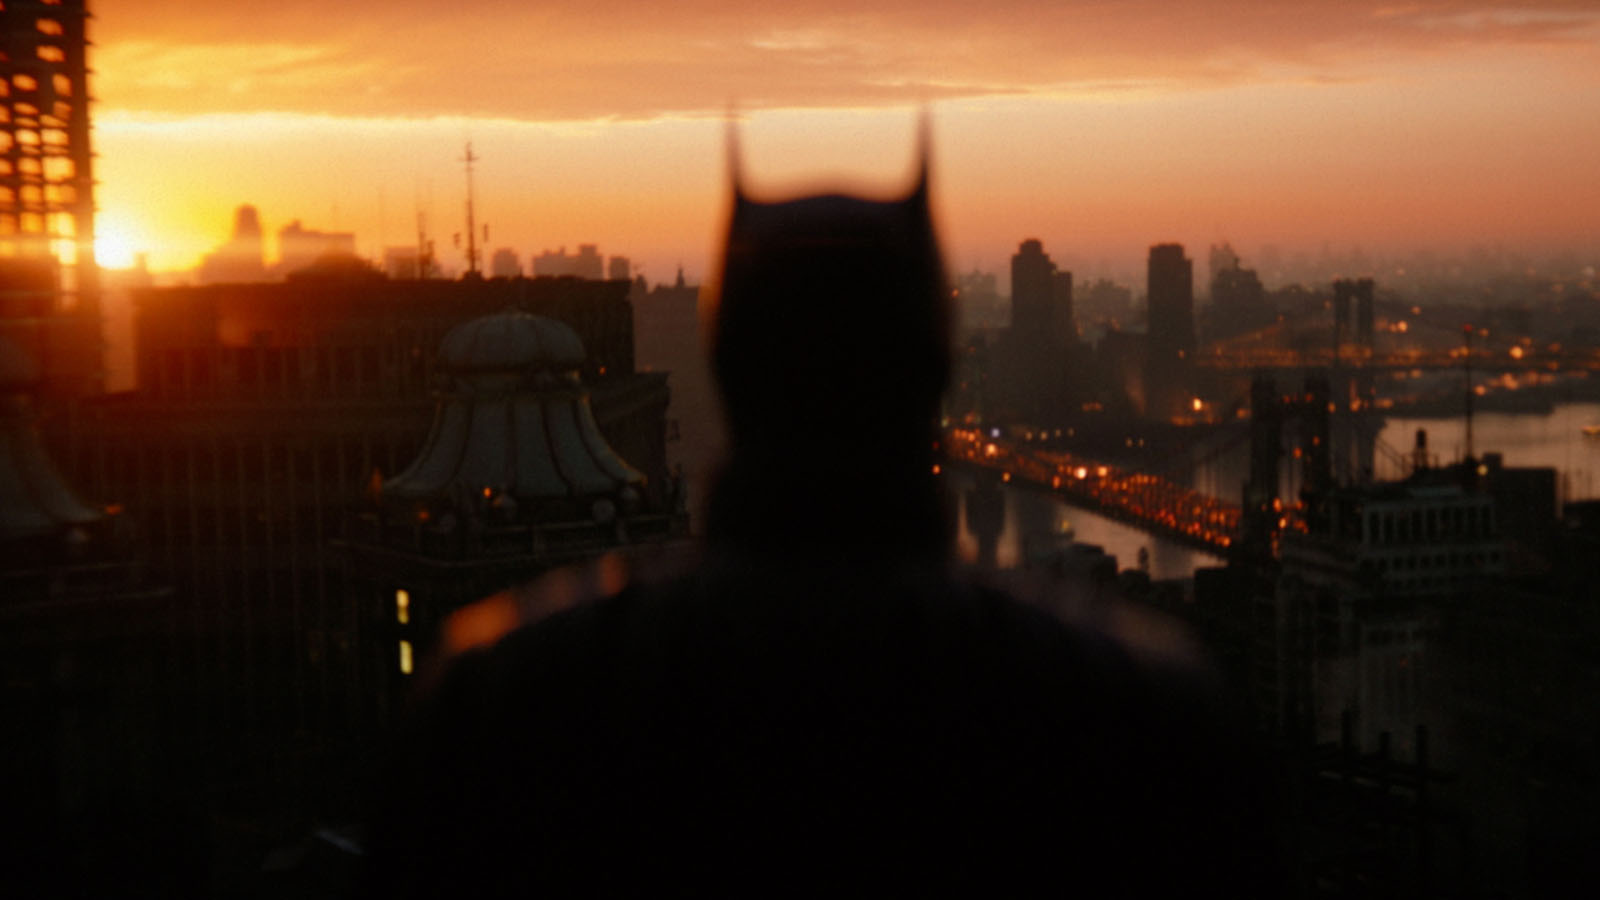 Batman looks out across the buildings and bridges of Gotham City. Image © Warner Bros.